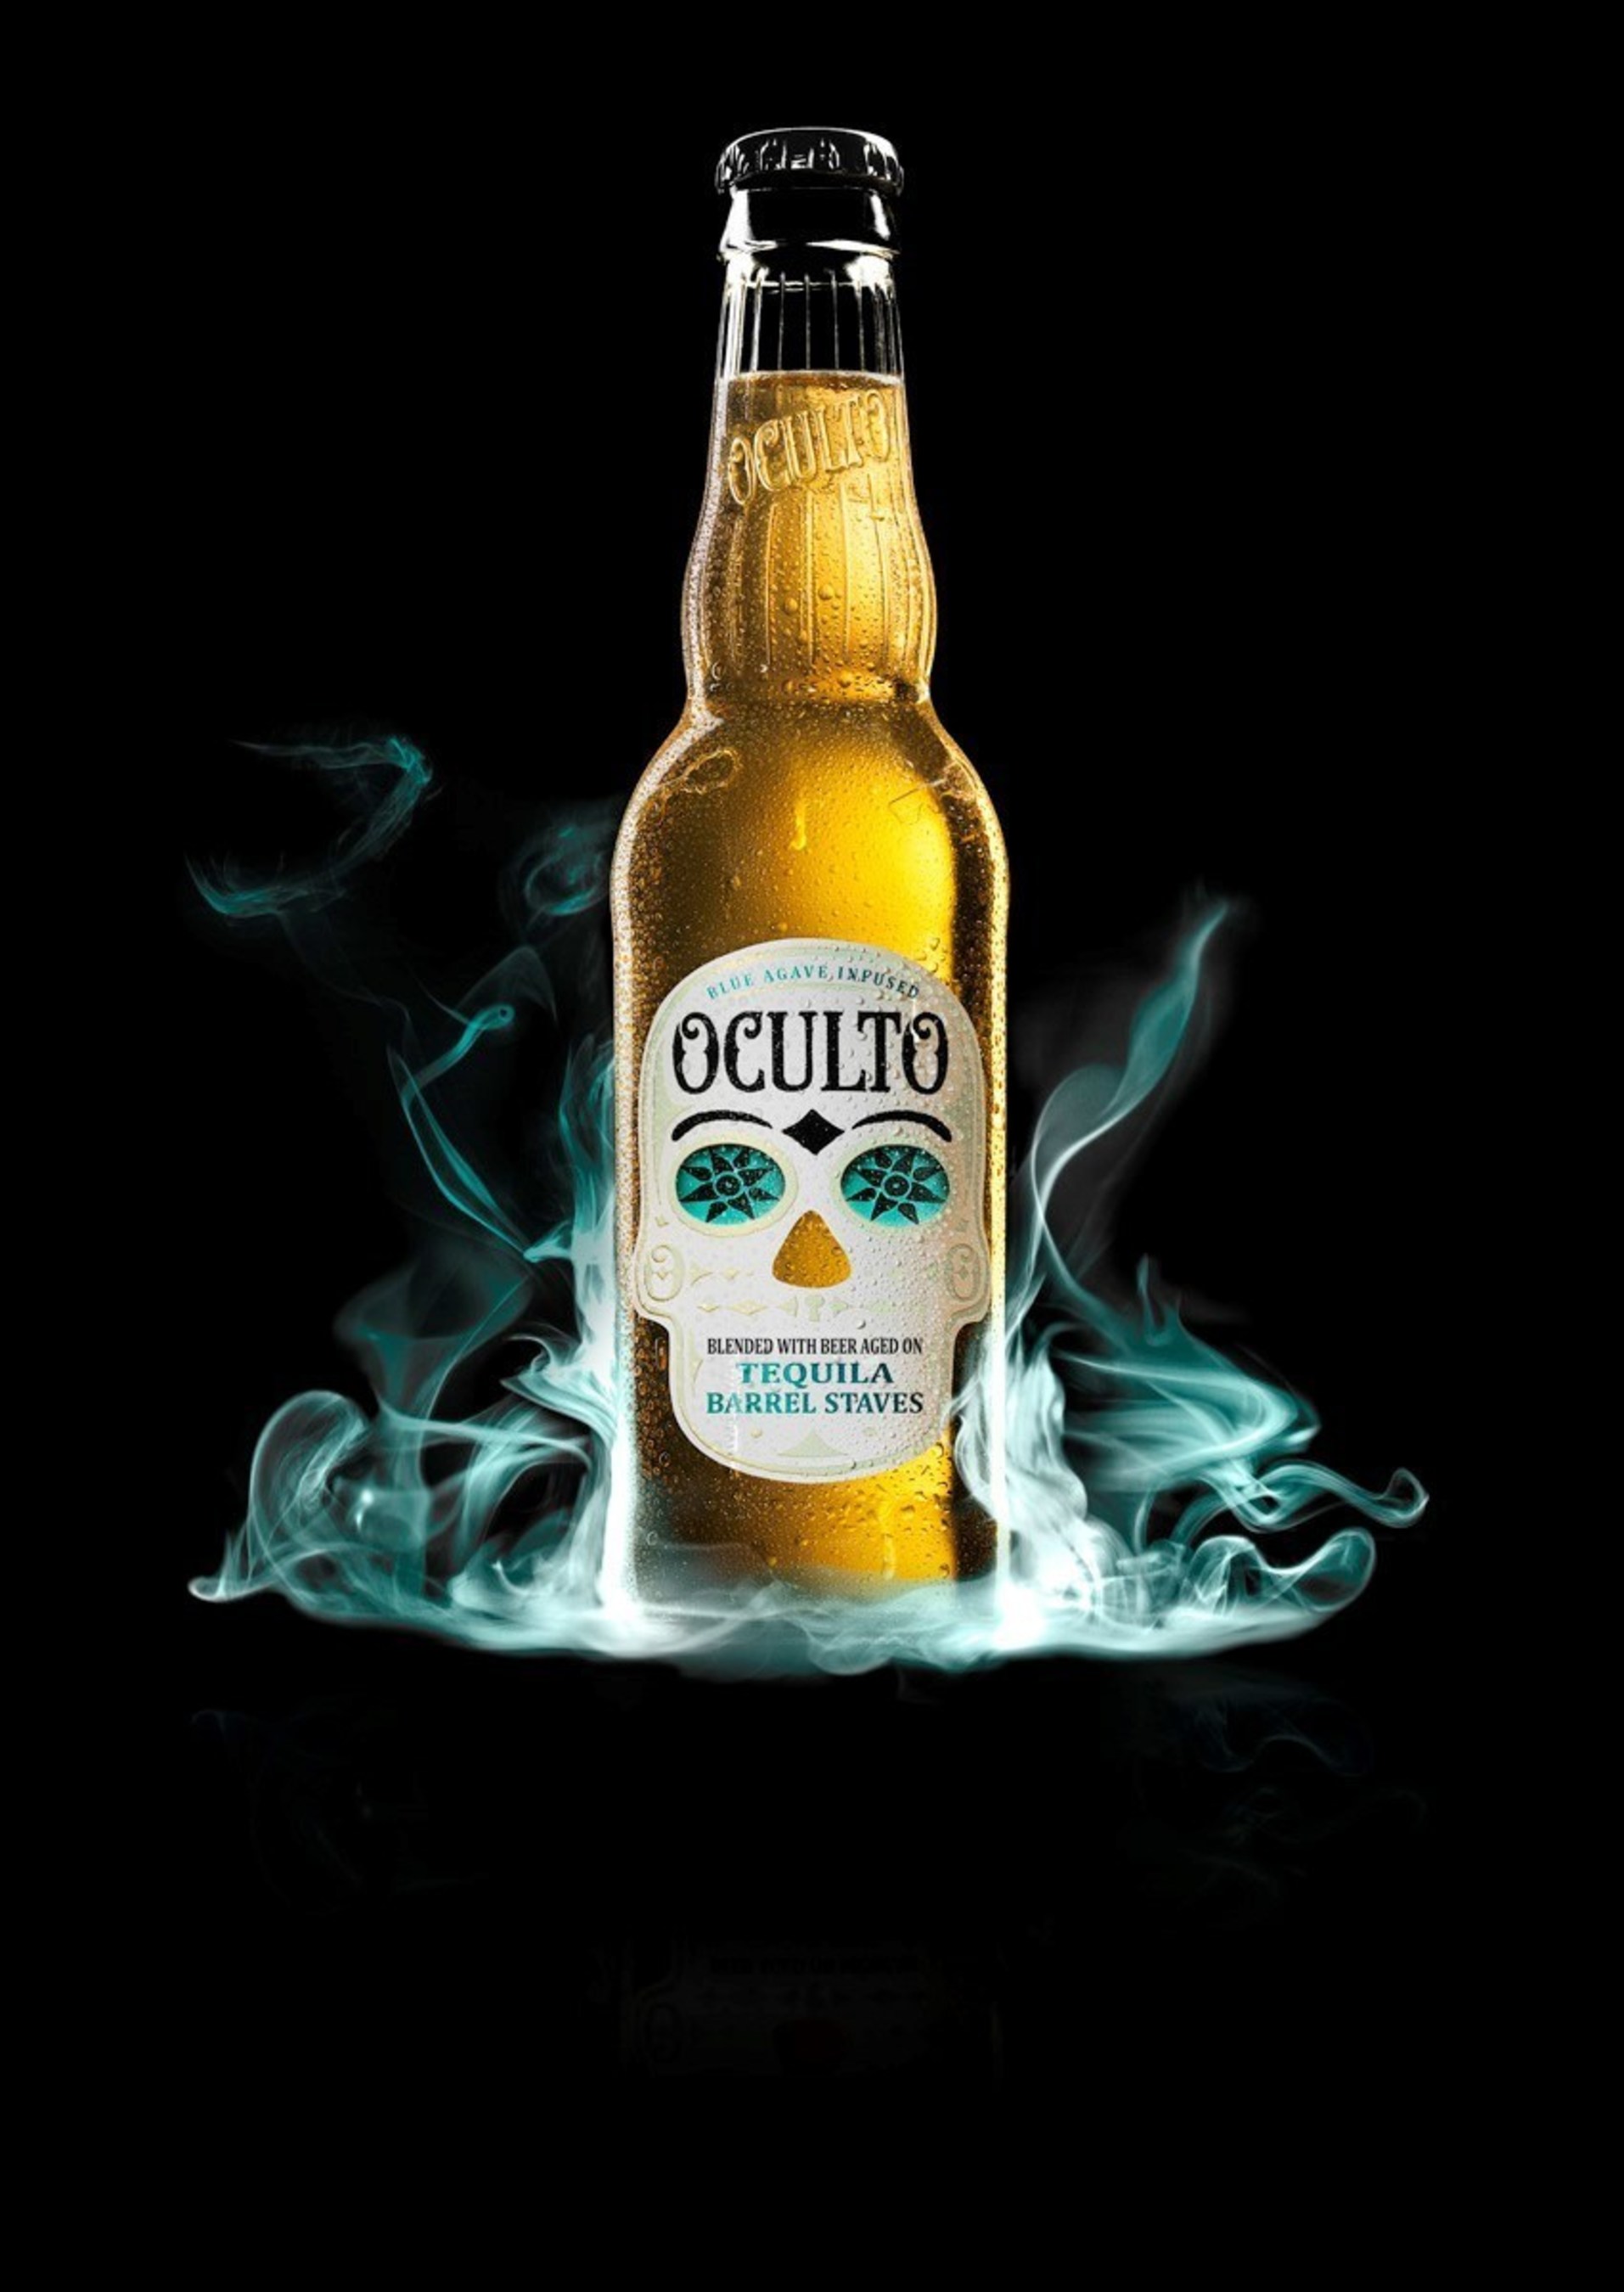 Oculto, which launched nationwide on Friday the 13th, is a unique lager blended with beer aged on tequila barrel staves.